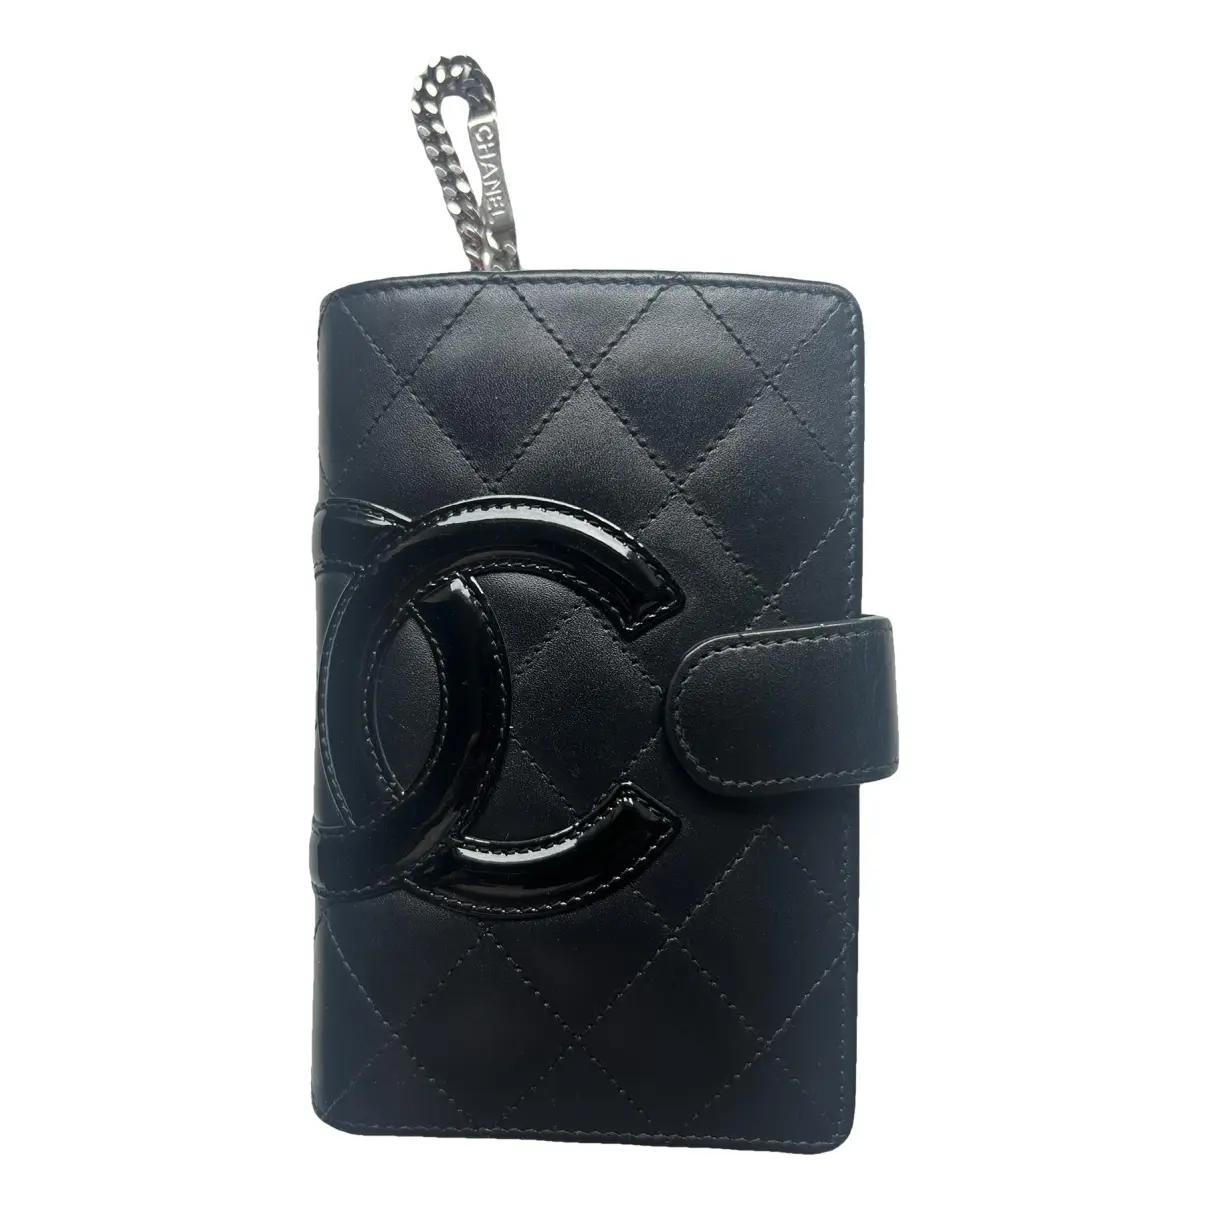 Cambon leather wallet